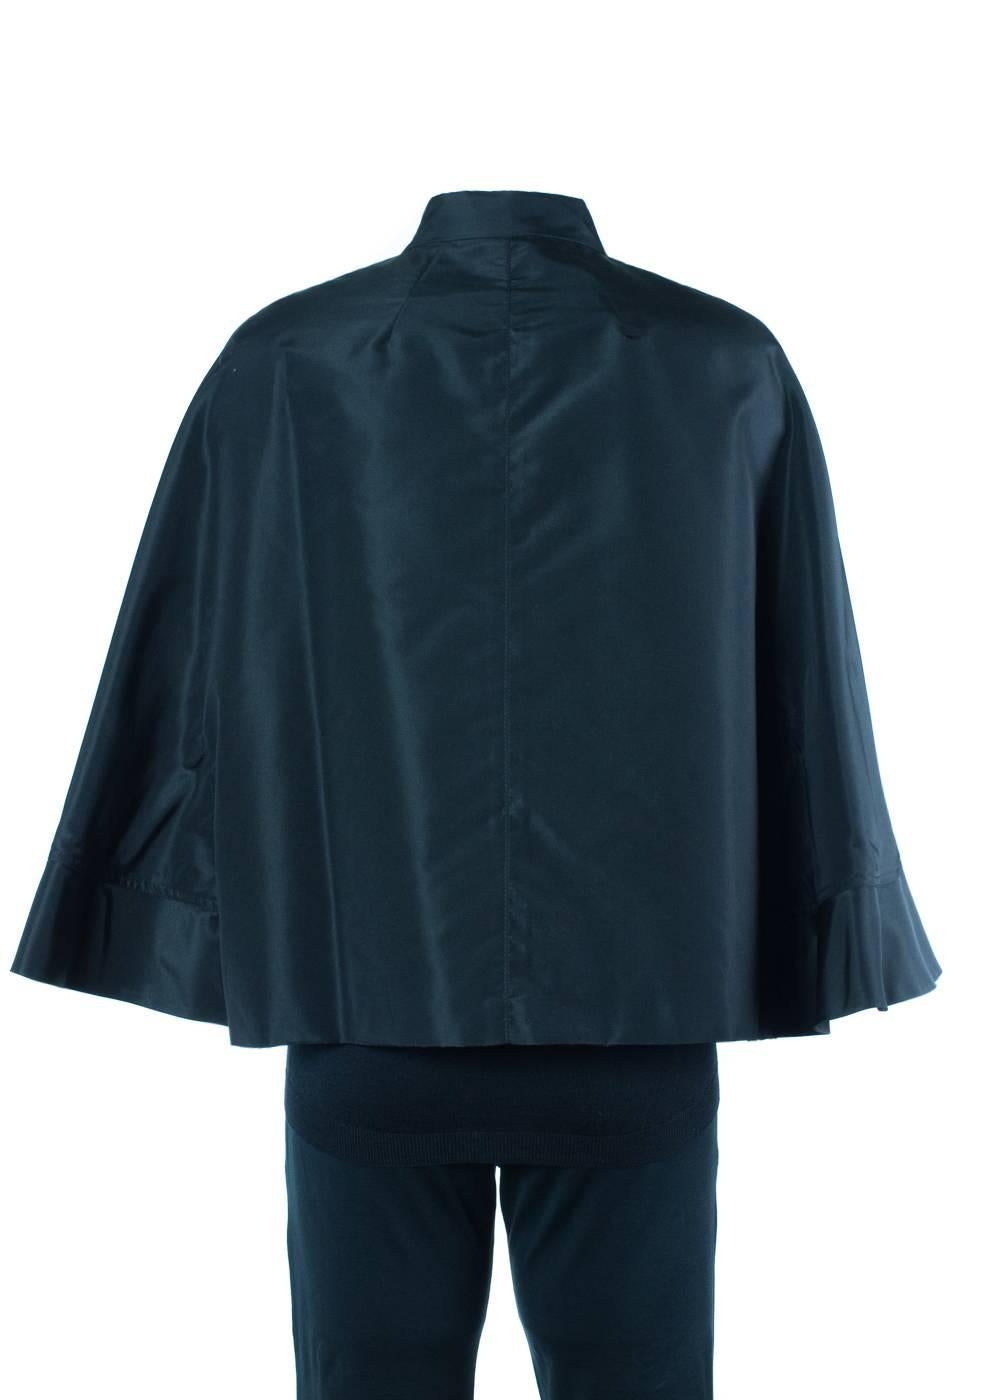 Brand New Valentino Jacket
Original Tag & Hanger Included
Retails in Stores & Online for $2000
Size IT 44 /US 8 Fits True to Size


This Valentino black coat jacket is super stylish and a unique must have for any women's closet. Perfect for the